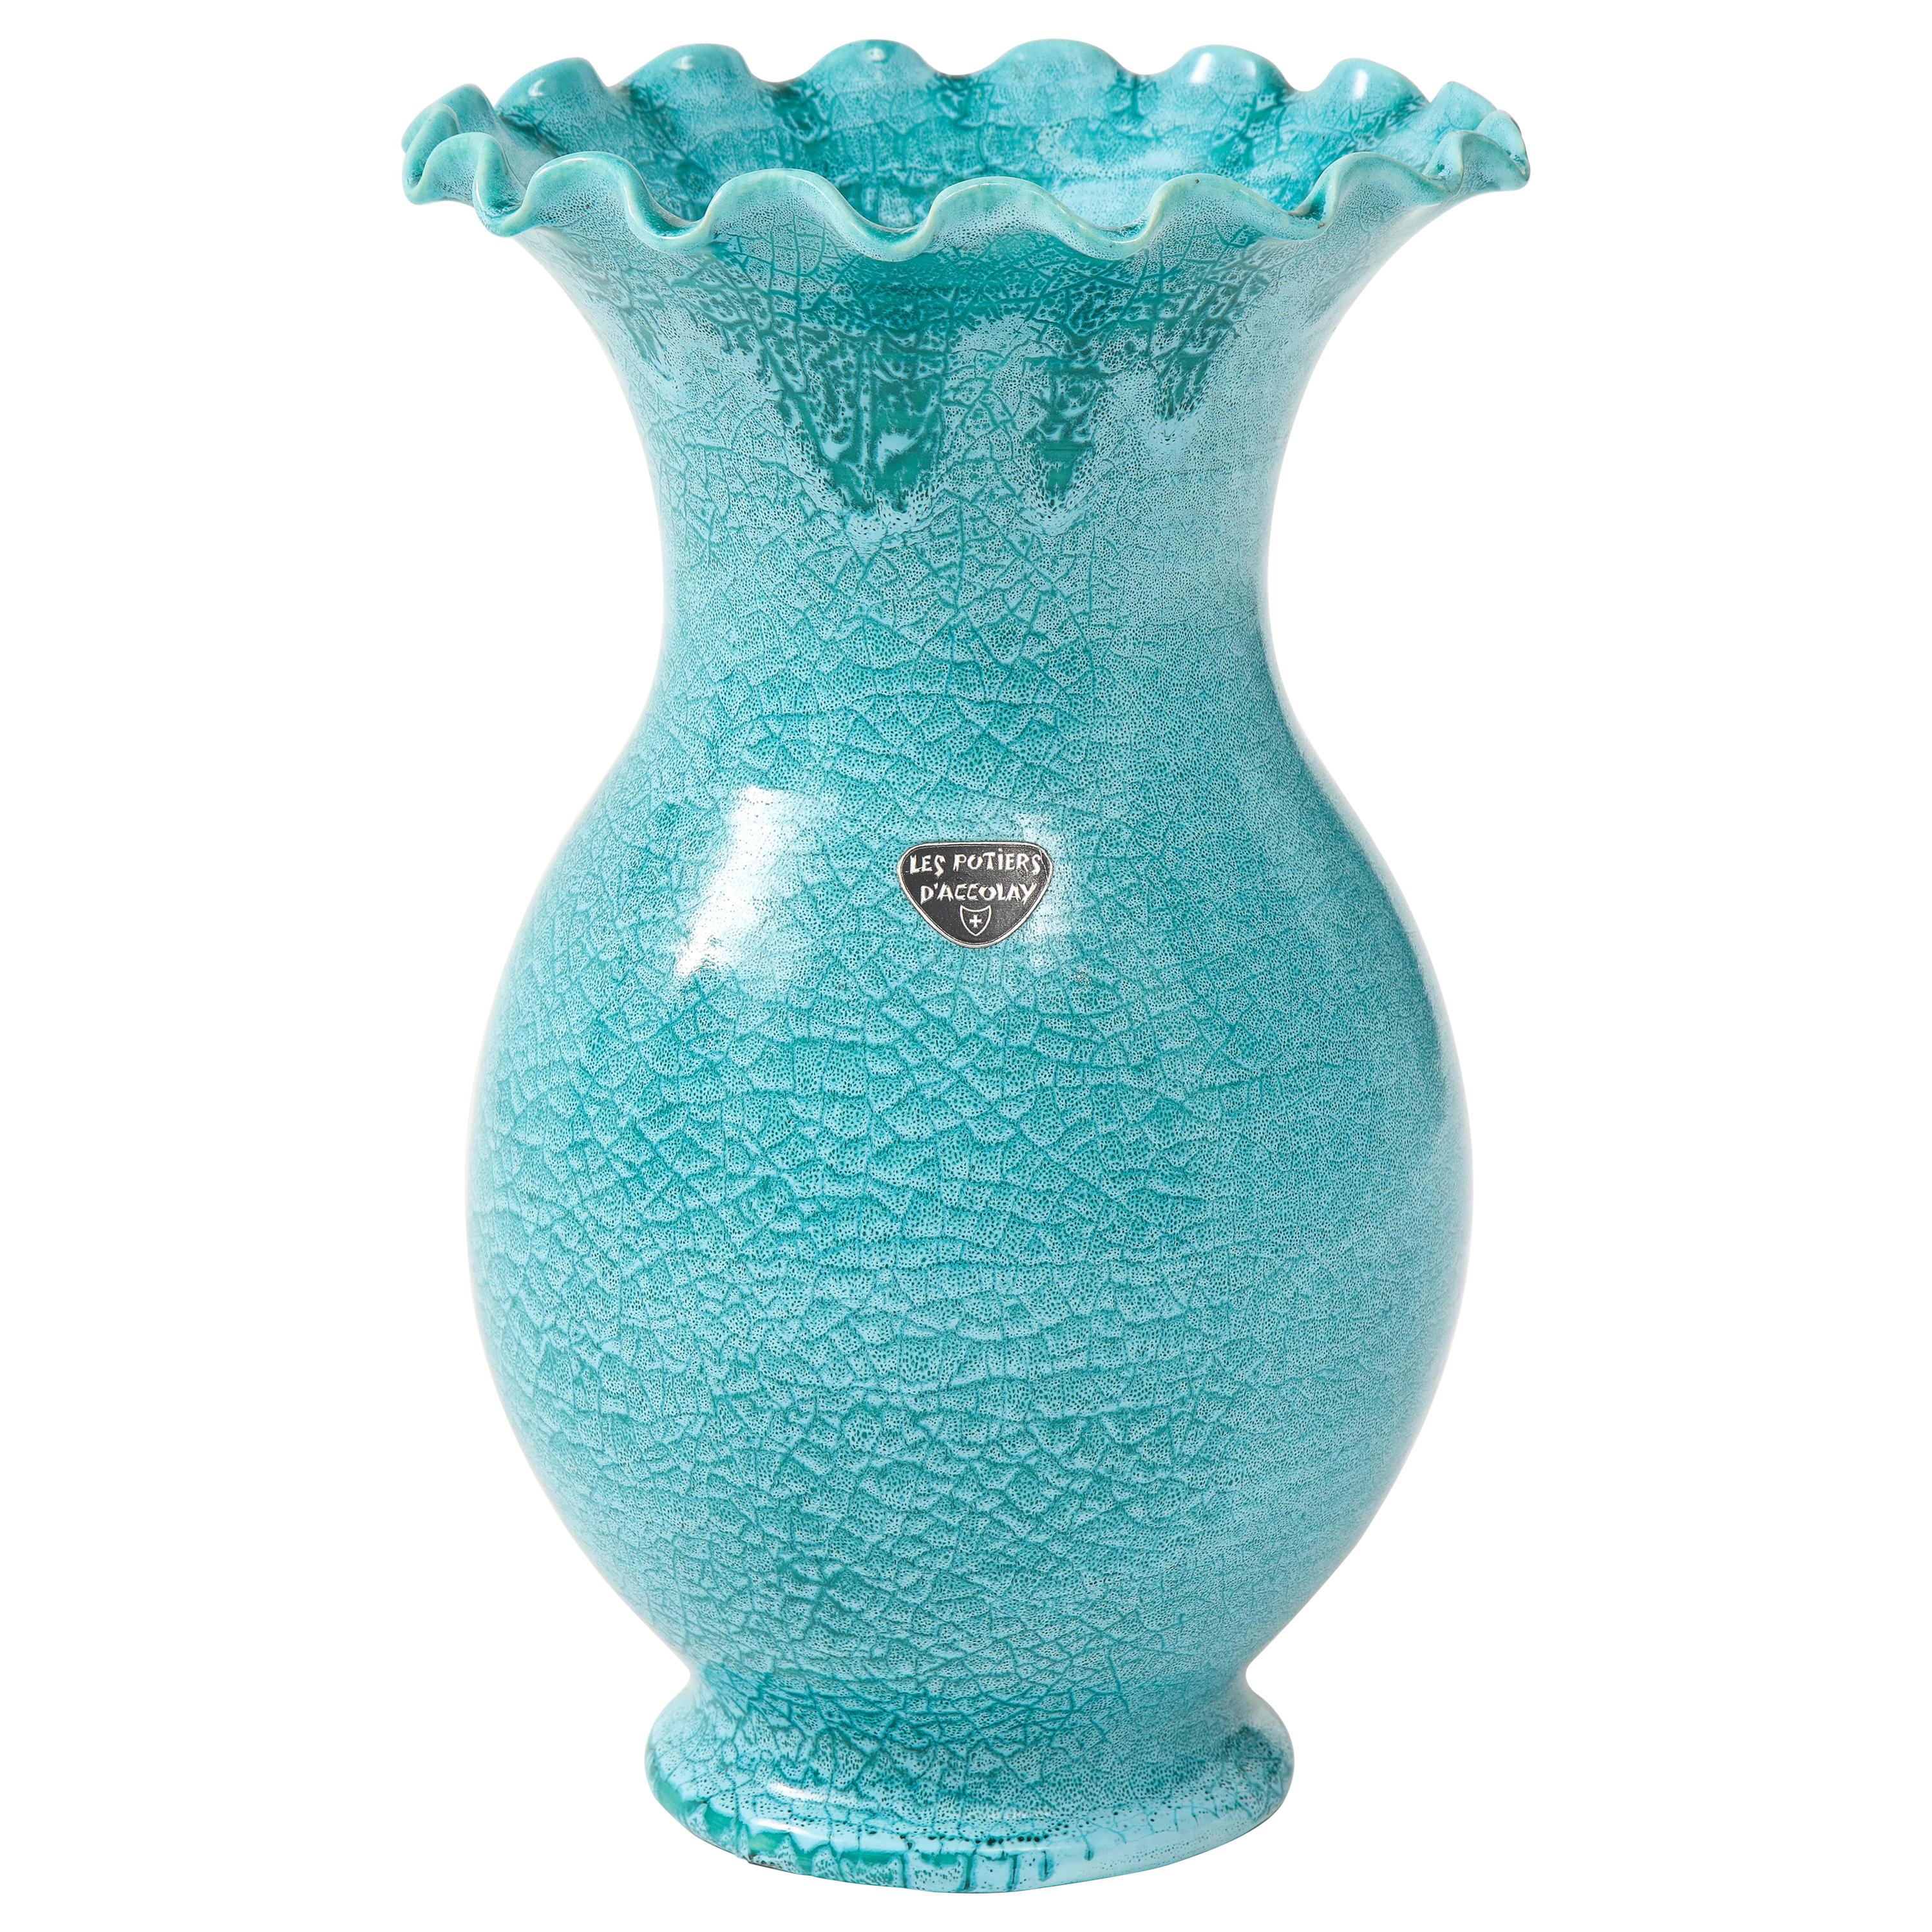 Vase by Accolay Pottery